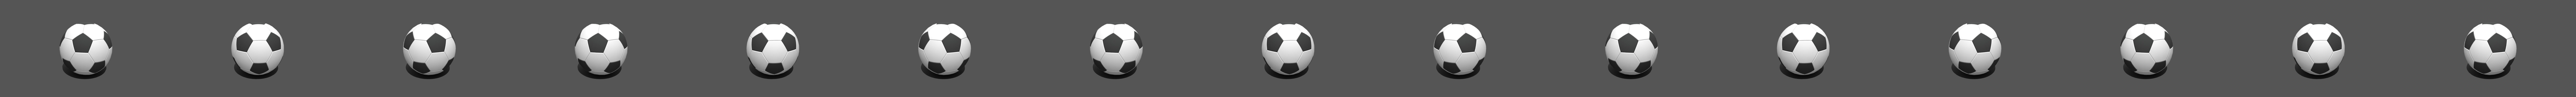 Pelota de Fútbol - Low Poly - Download Free 3D model by 3D Inventions  (@3dinventions) [daa4844]